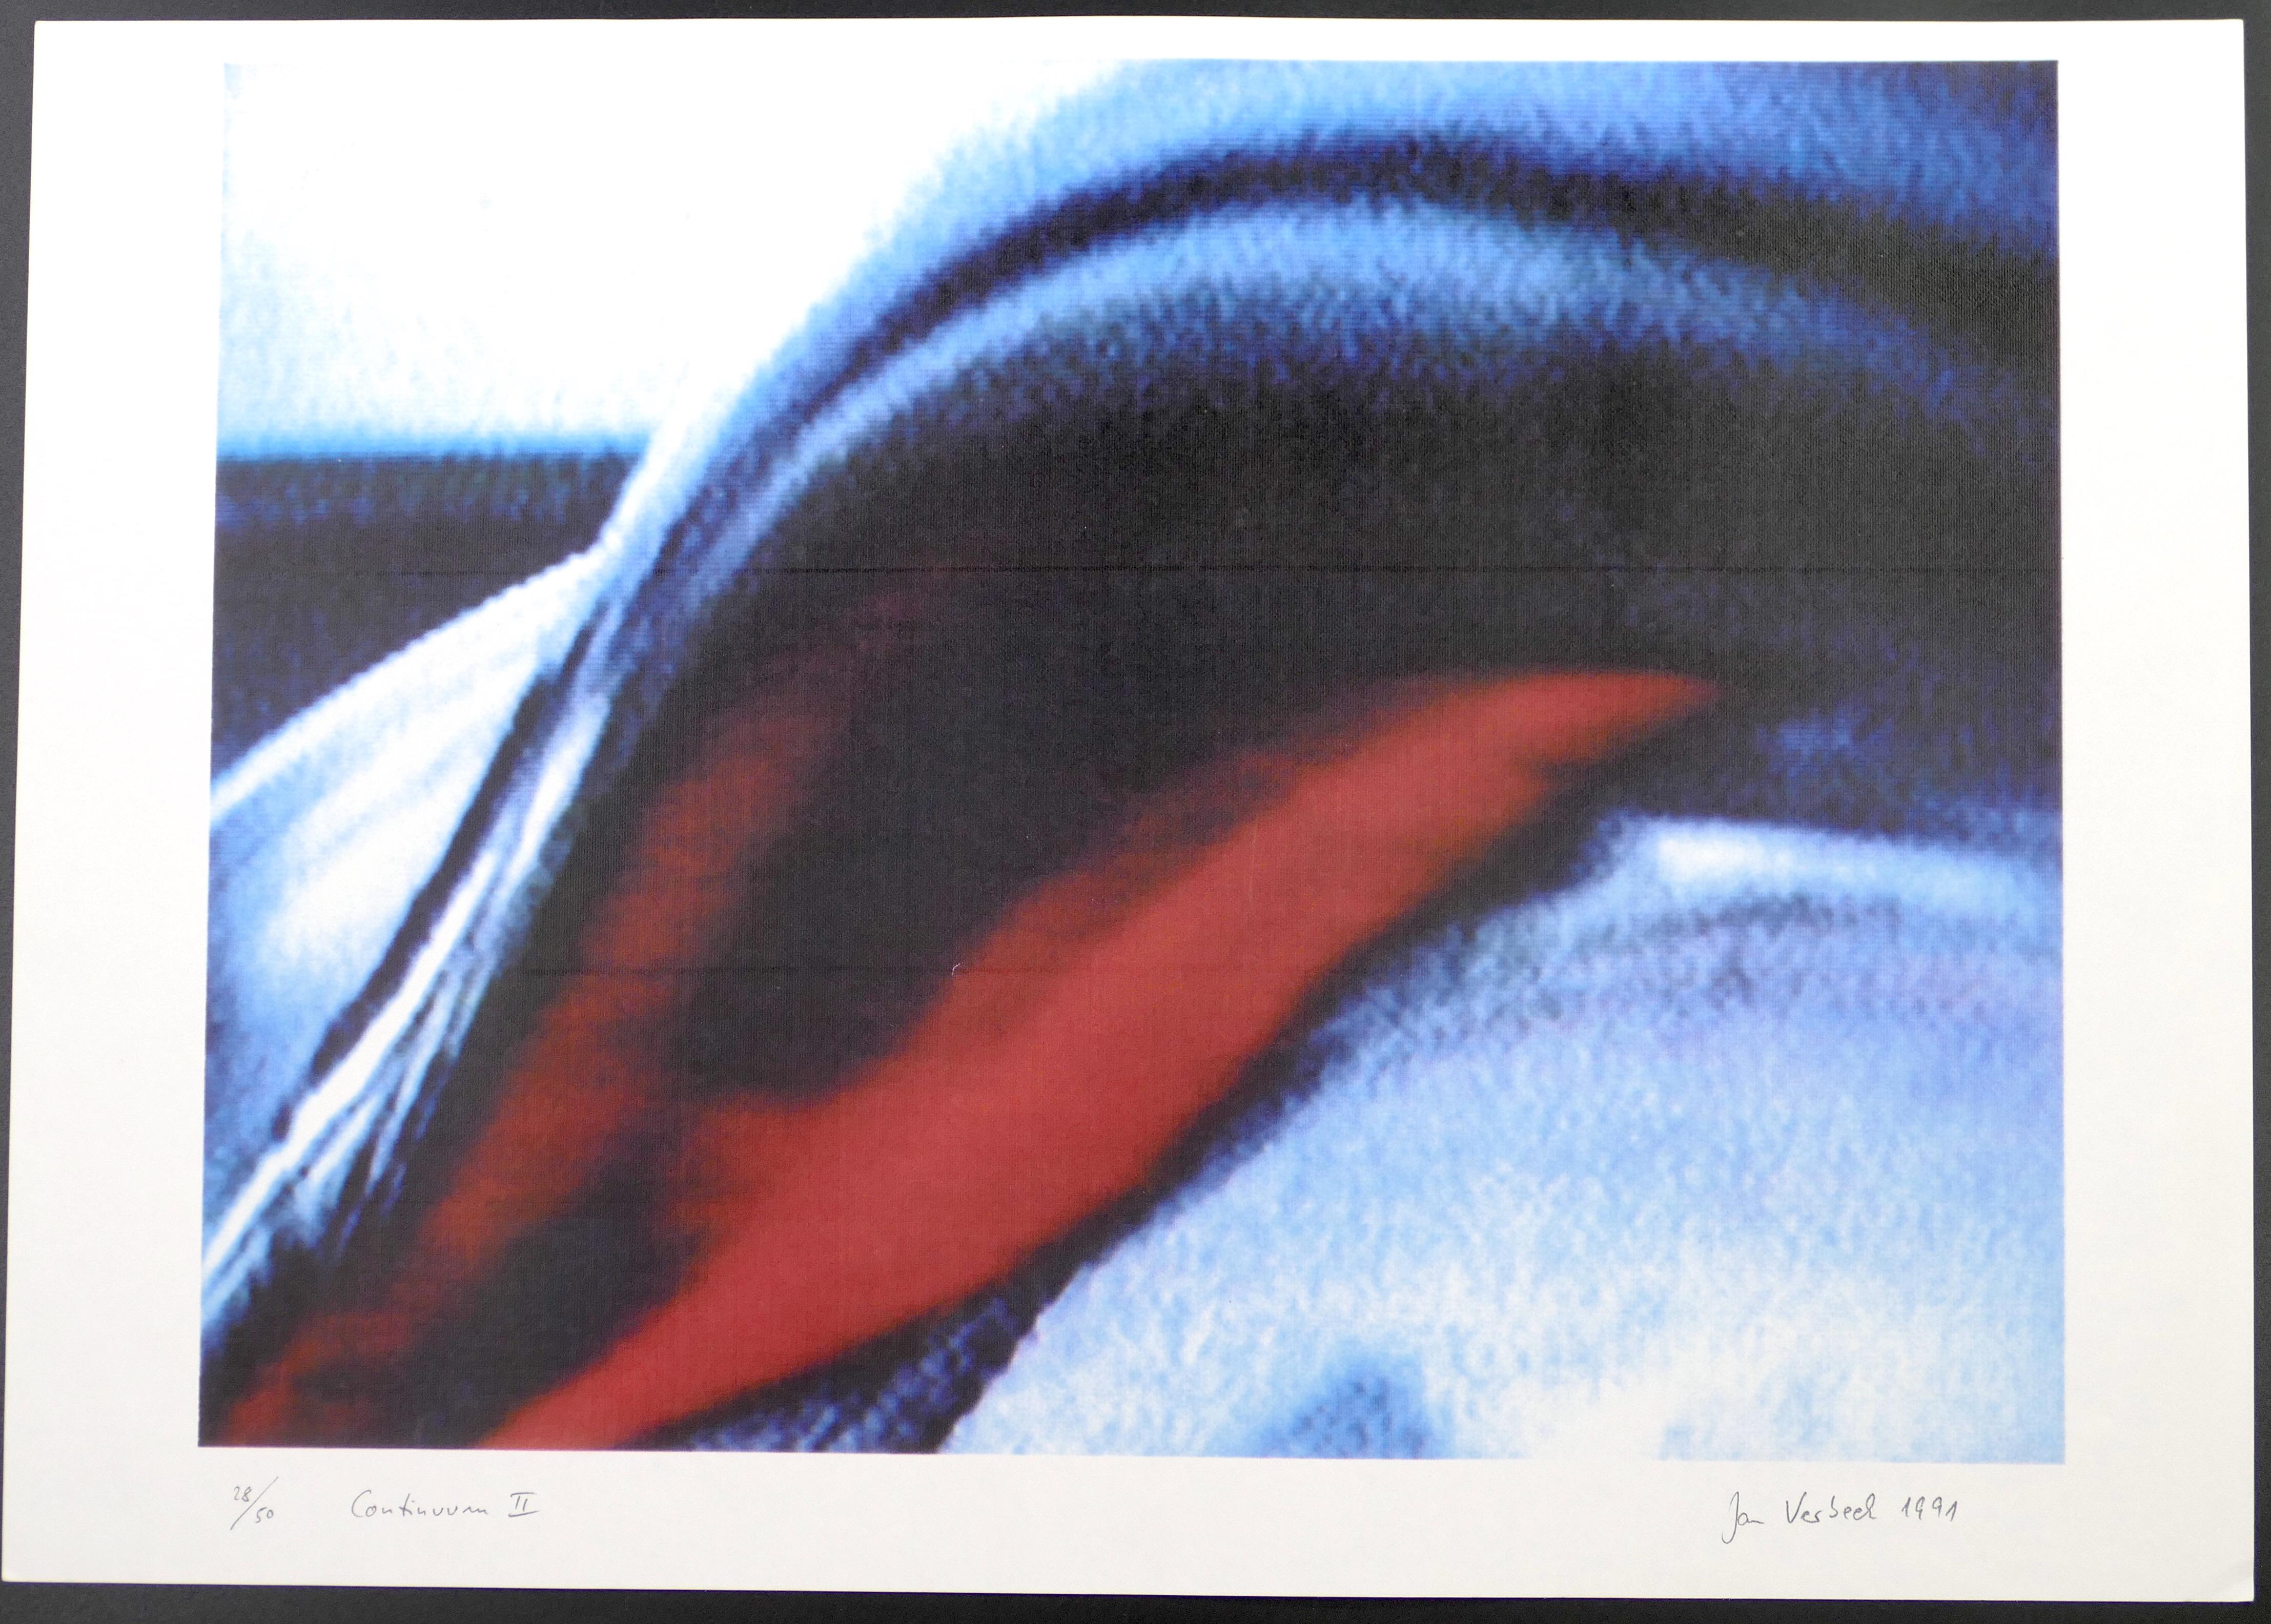 Continuum II is an original color photograph realized by Jan Verbeel in 1991.

Limited edition of 50 prints. Numbered 28/50 and titled Continuum II bottom left.

Hand-signed and dated bottom right.

Very good conditions.

Abstract and fascinating